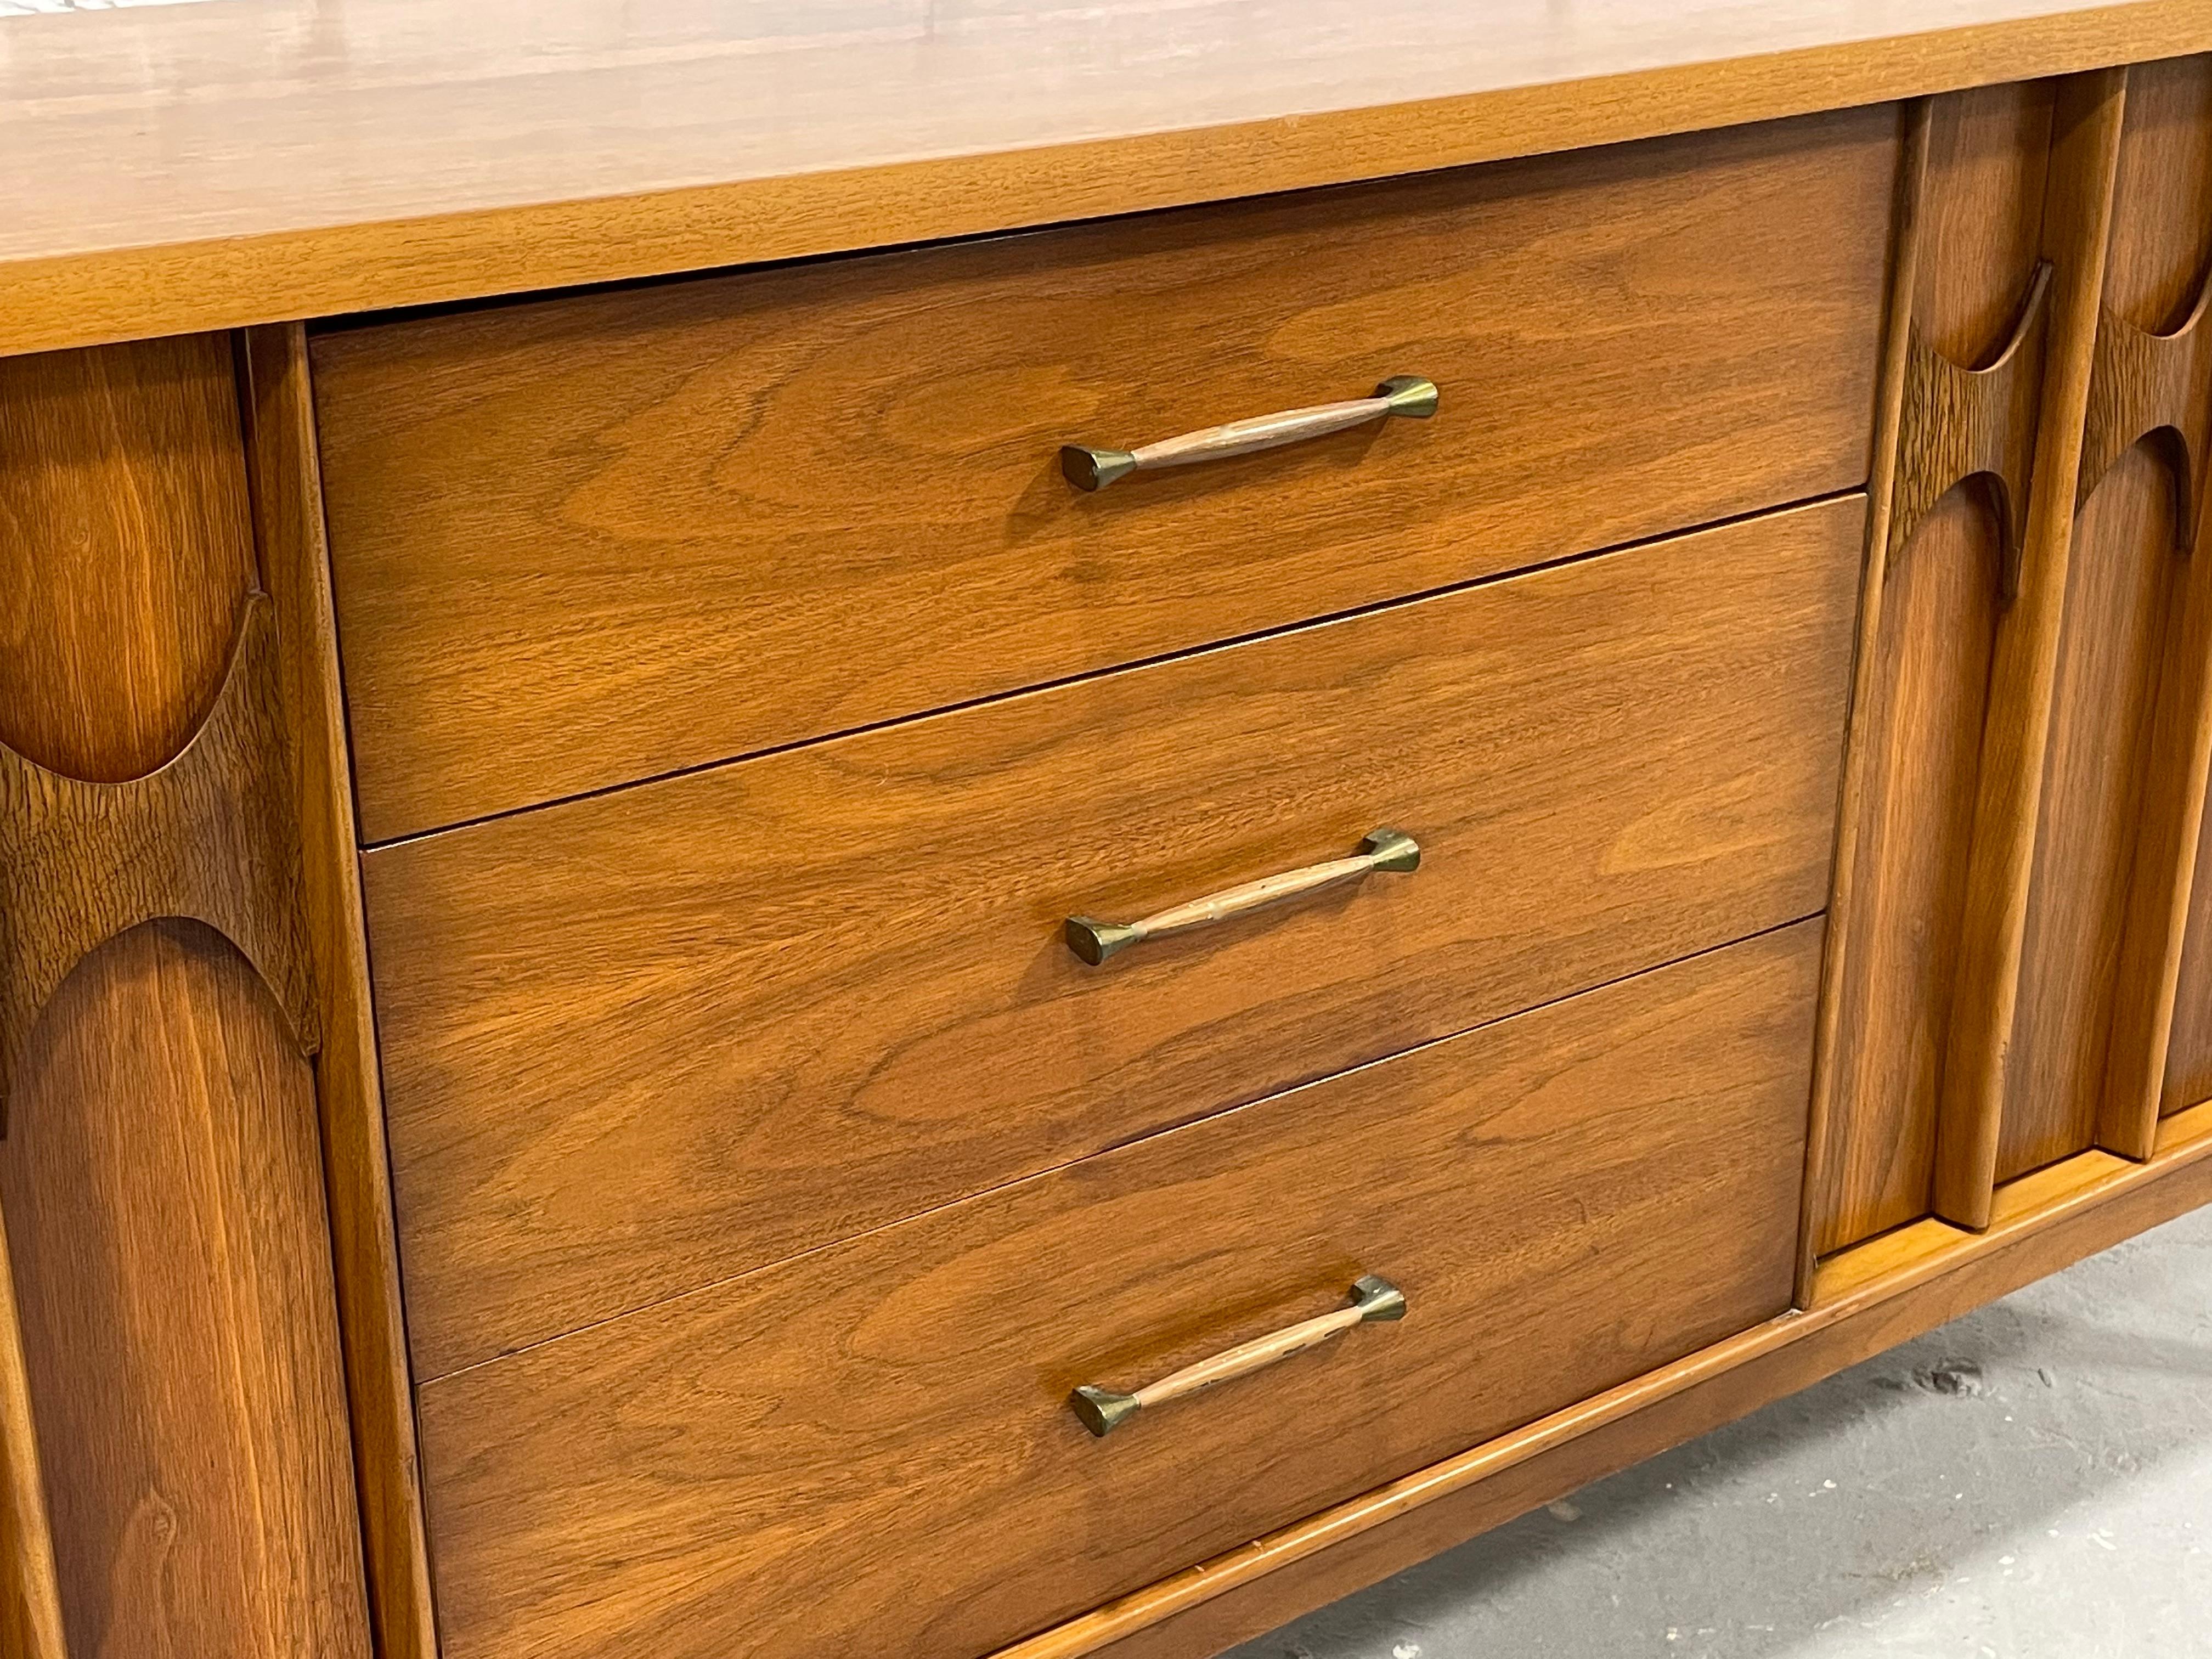 SCULPTED Mid Century MODERN CREDENZA / Long Dresser by Kent Coffey Perspecta, c. 6